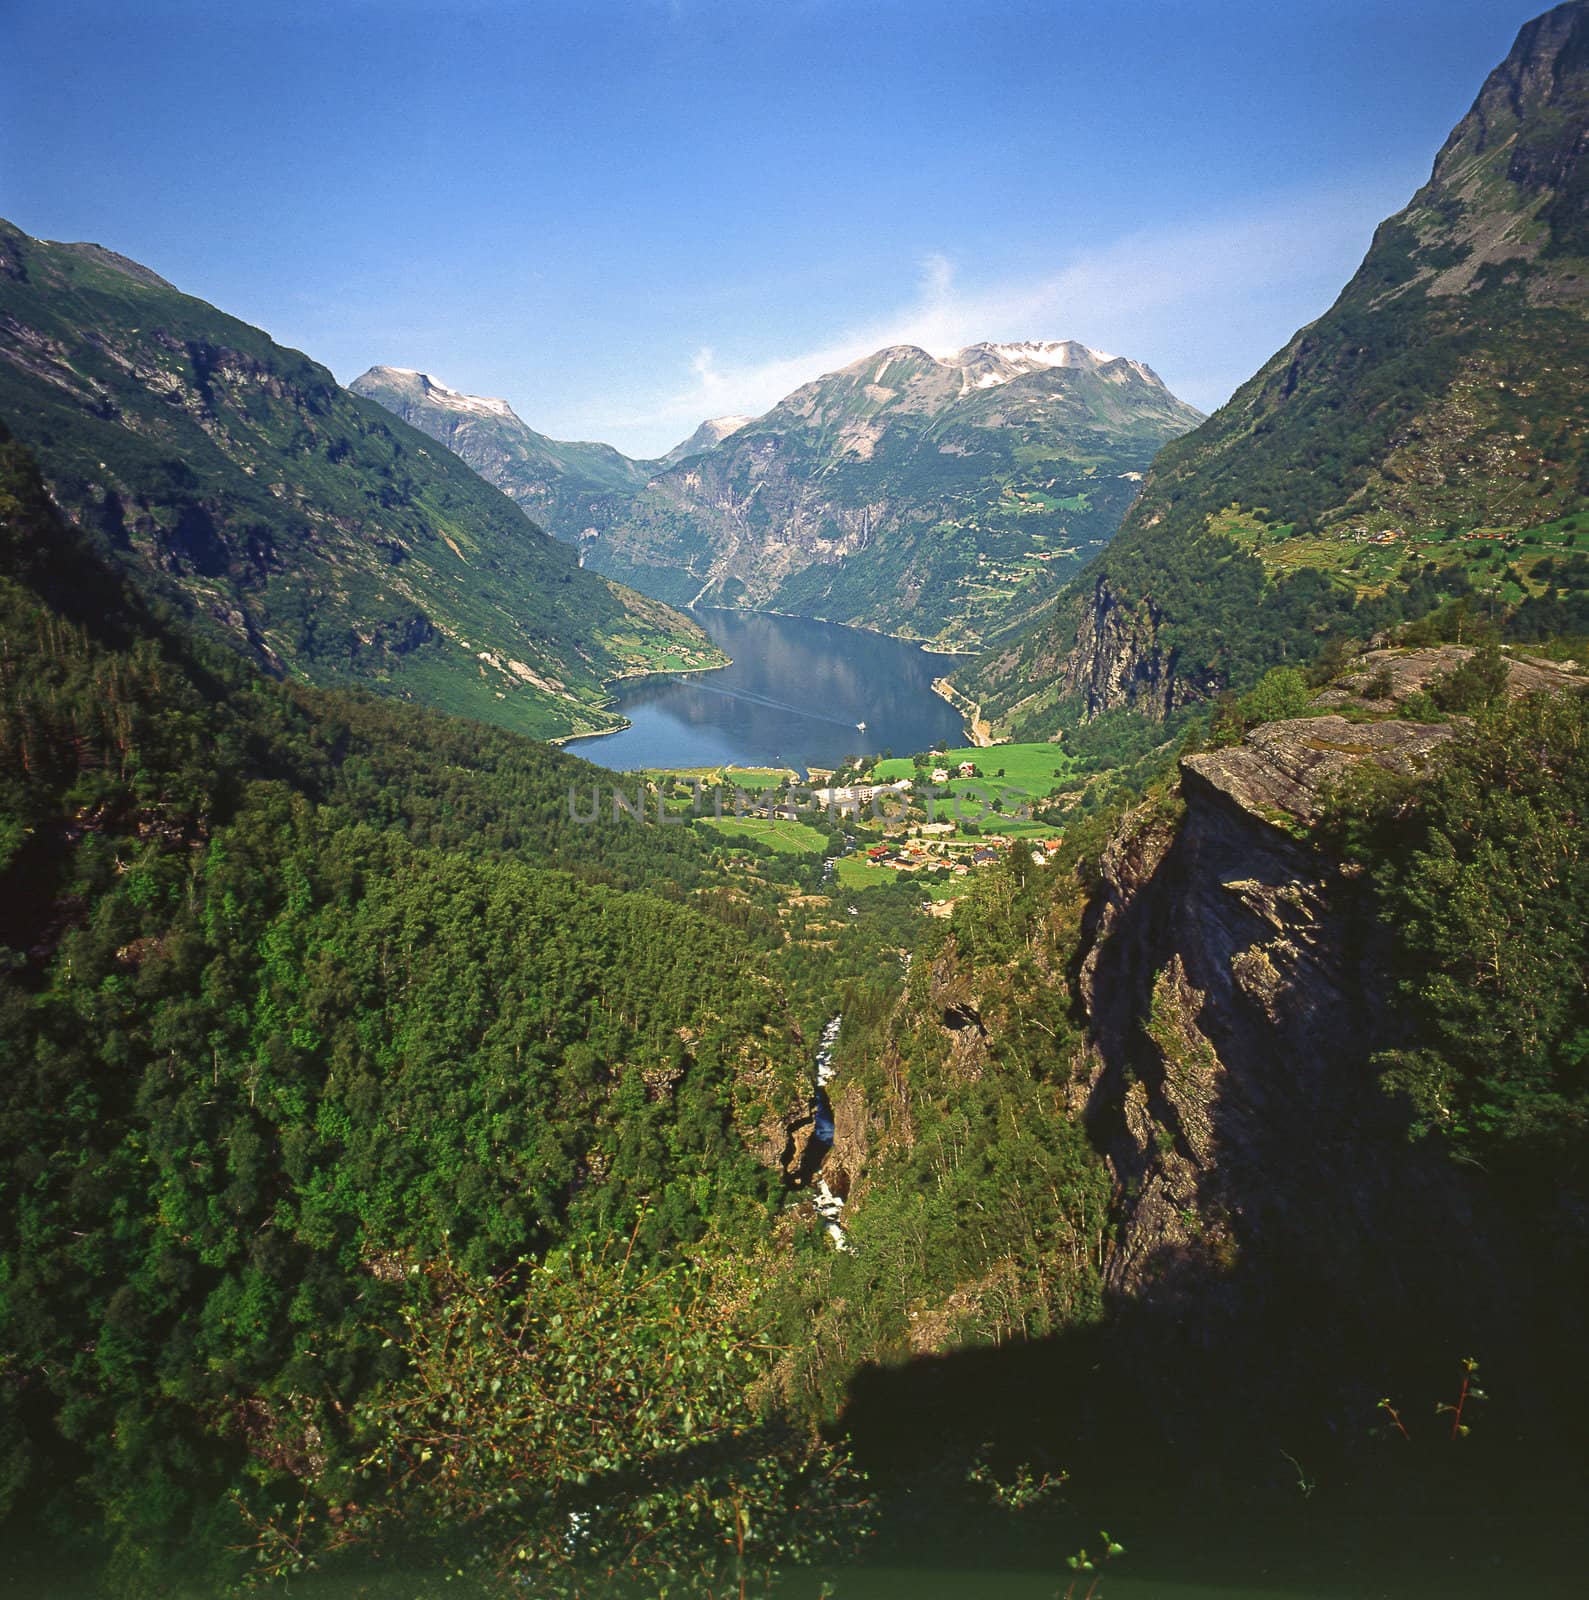 Geiranger Fjord, Norway by jol66